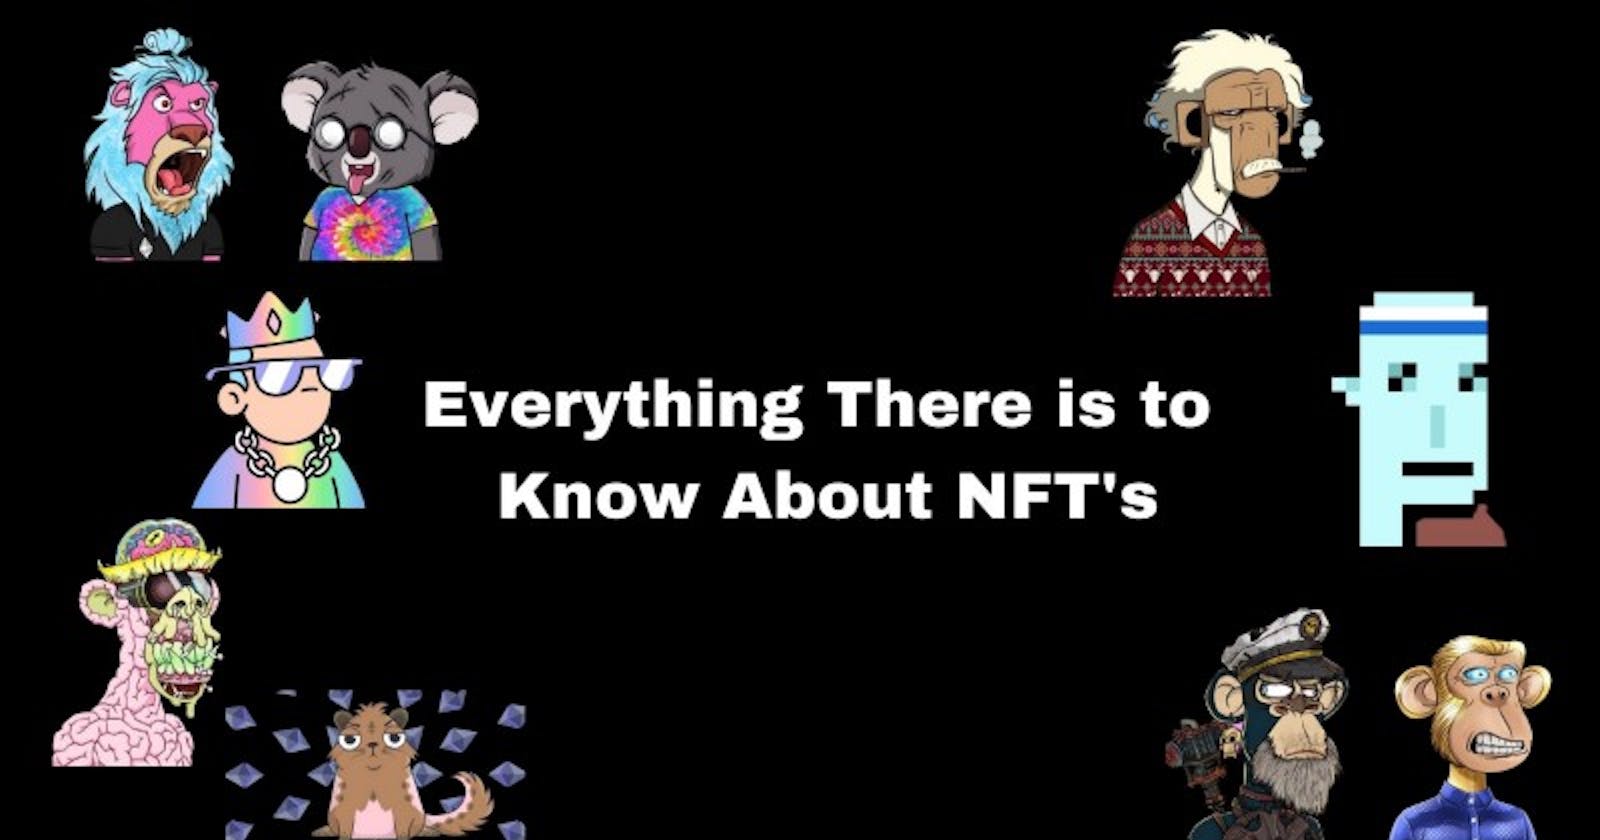 Everything There is to know about NFT’s